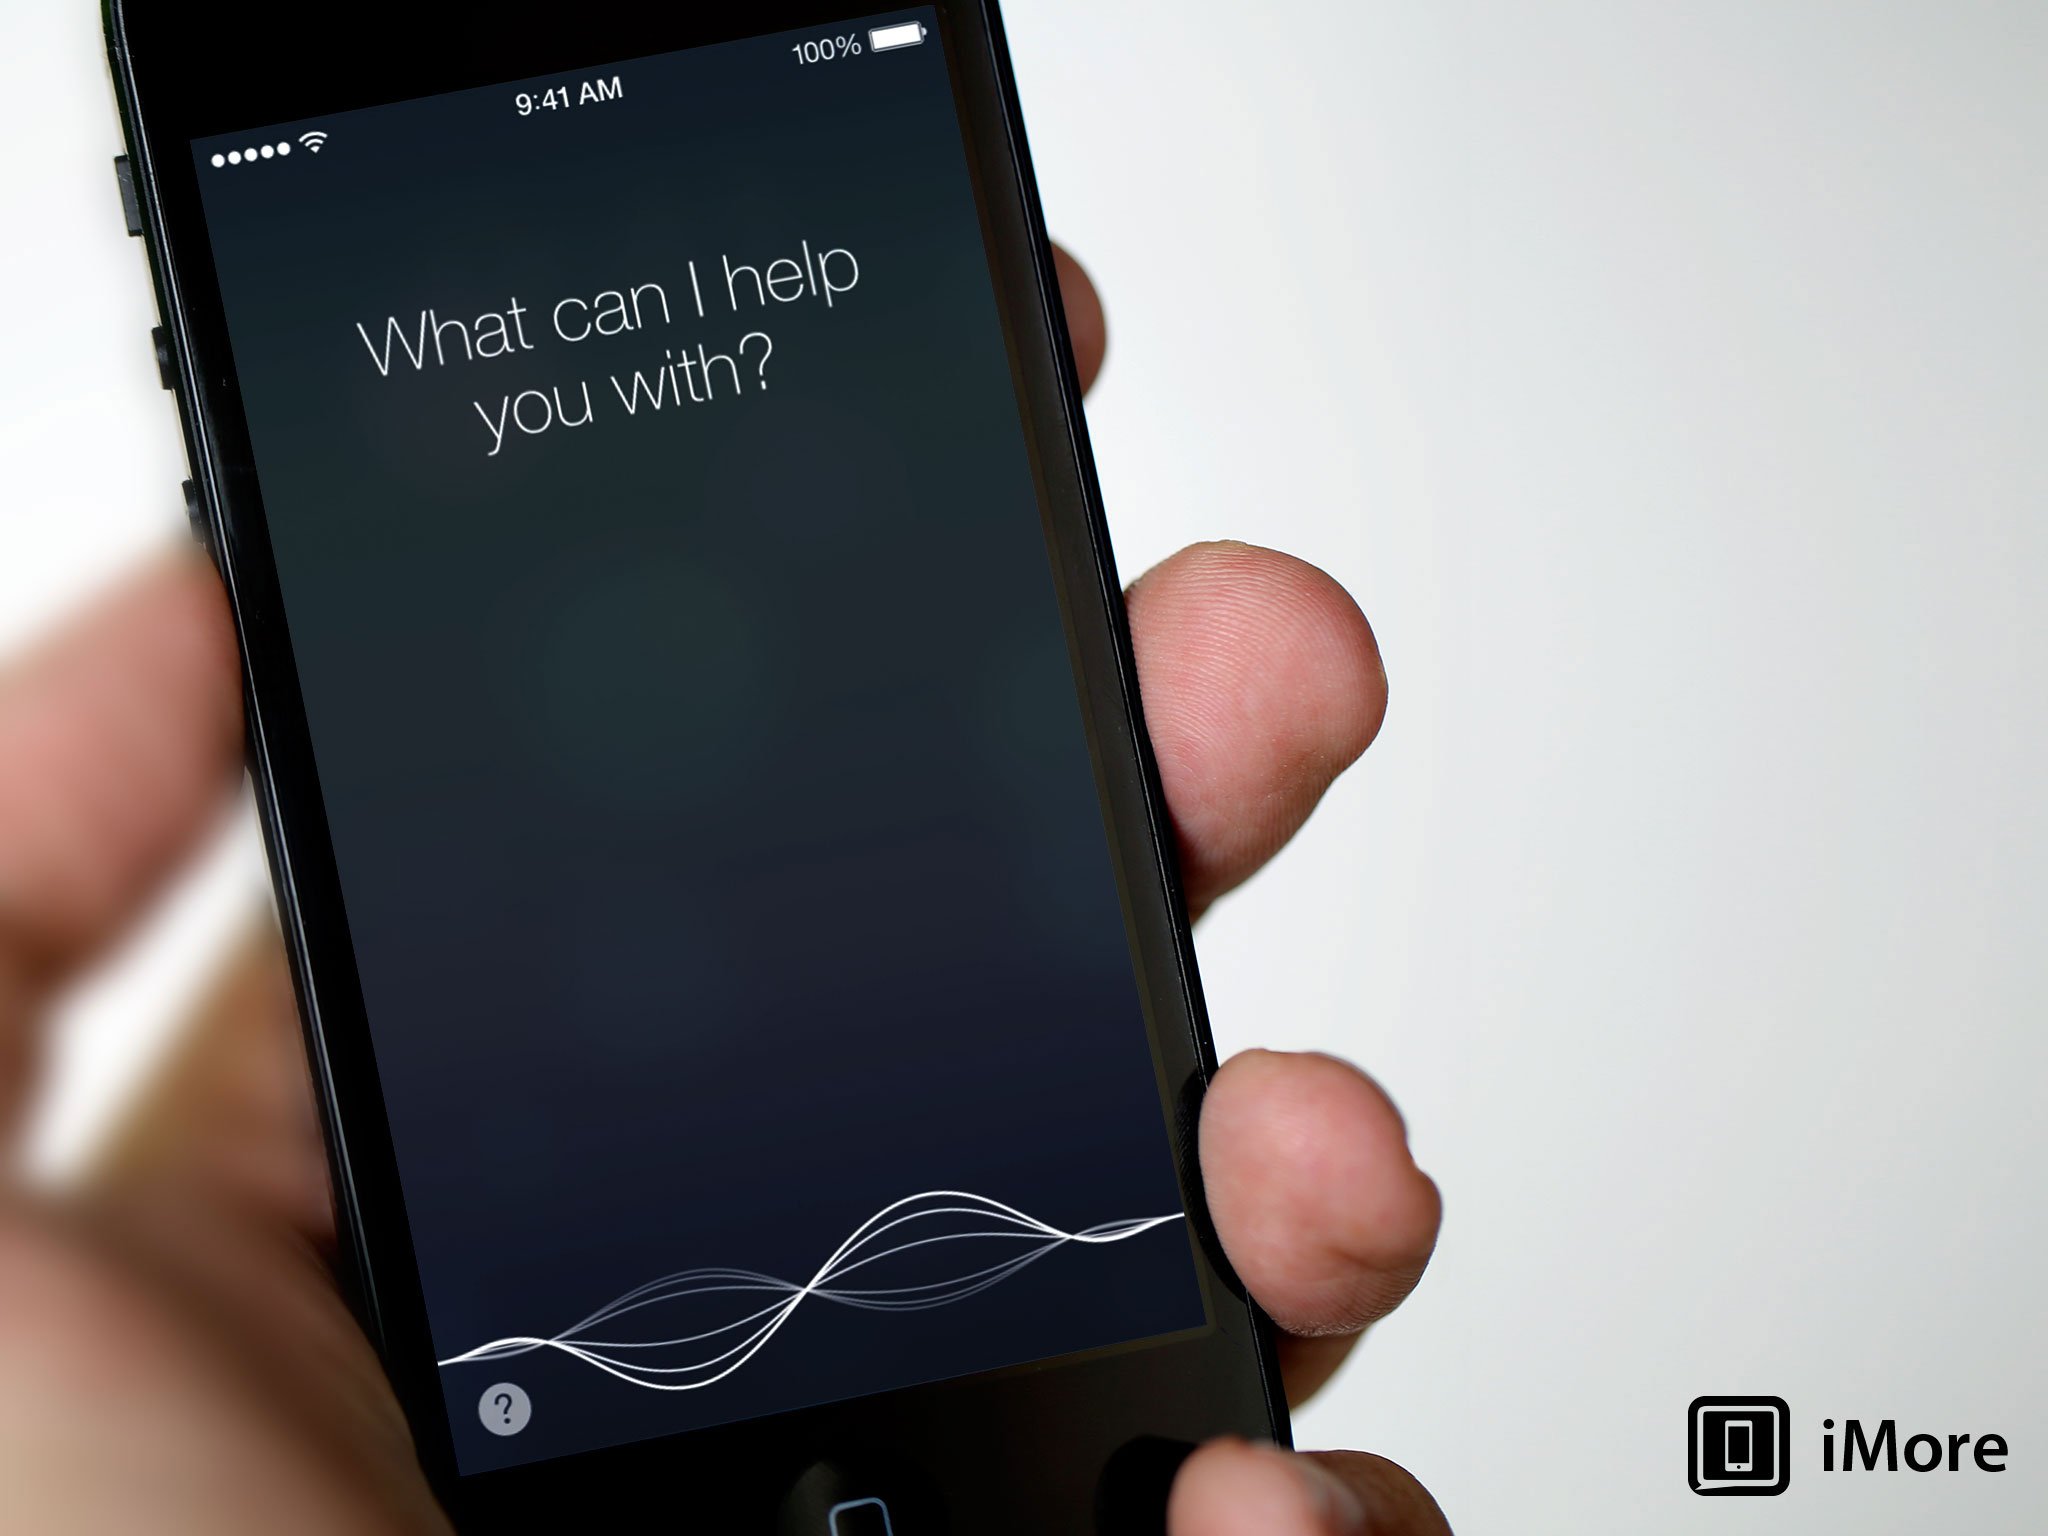 iOS 7 preview: Siri gets a new look, access to settings, more services, still no predictive results